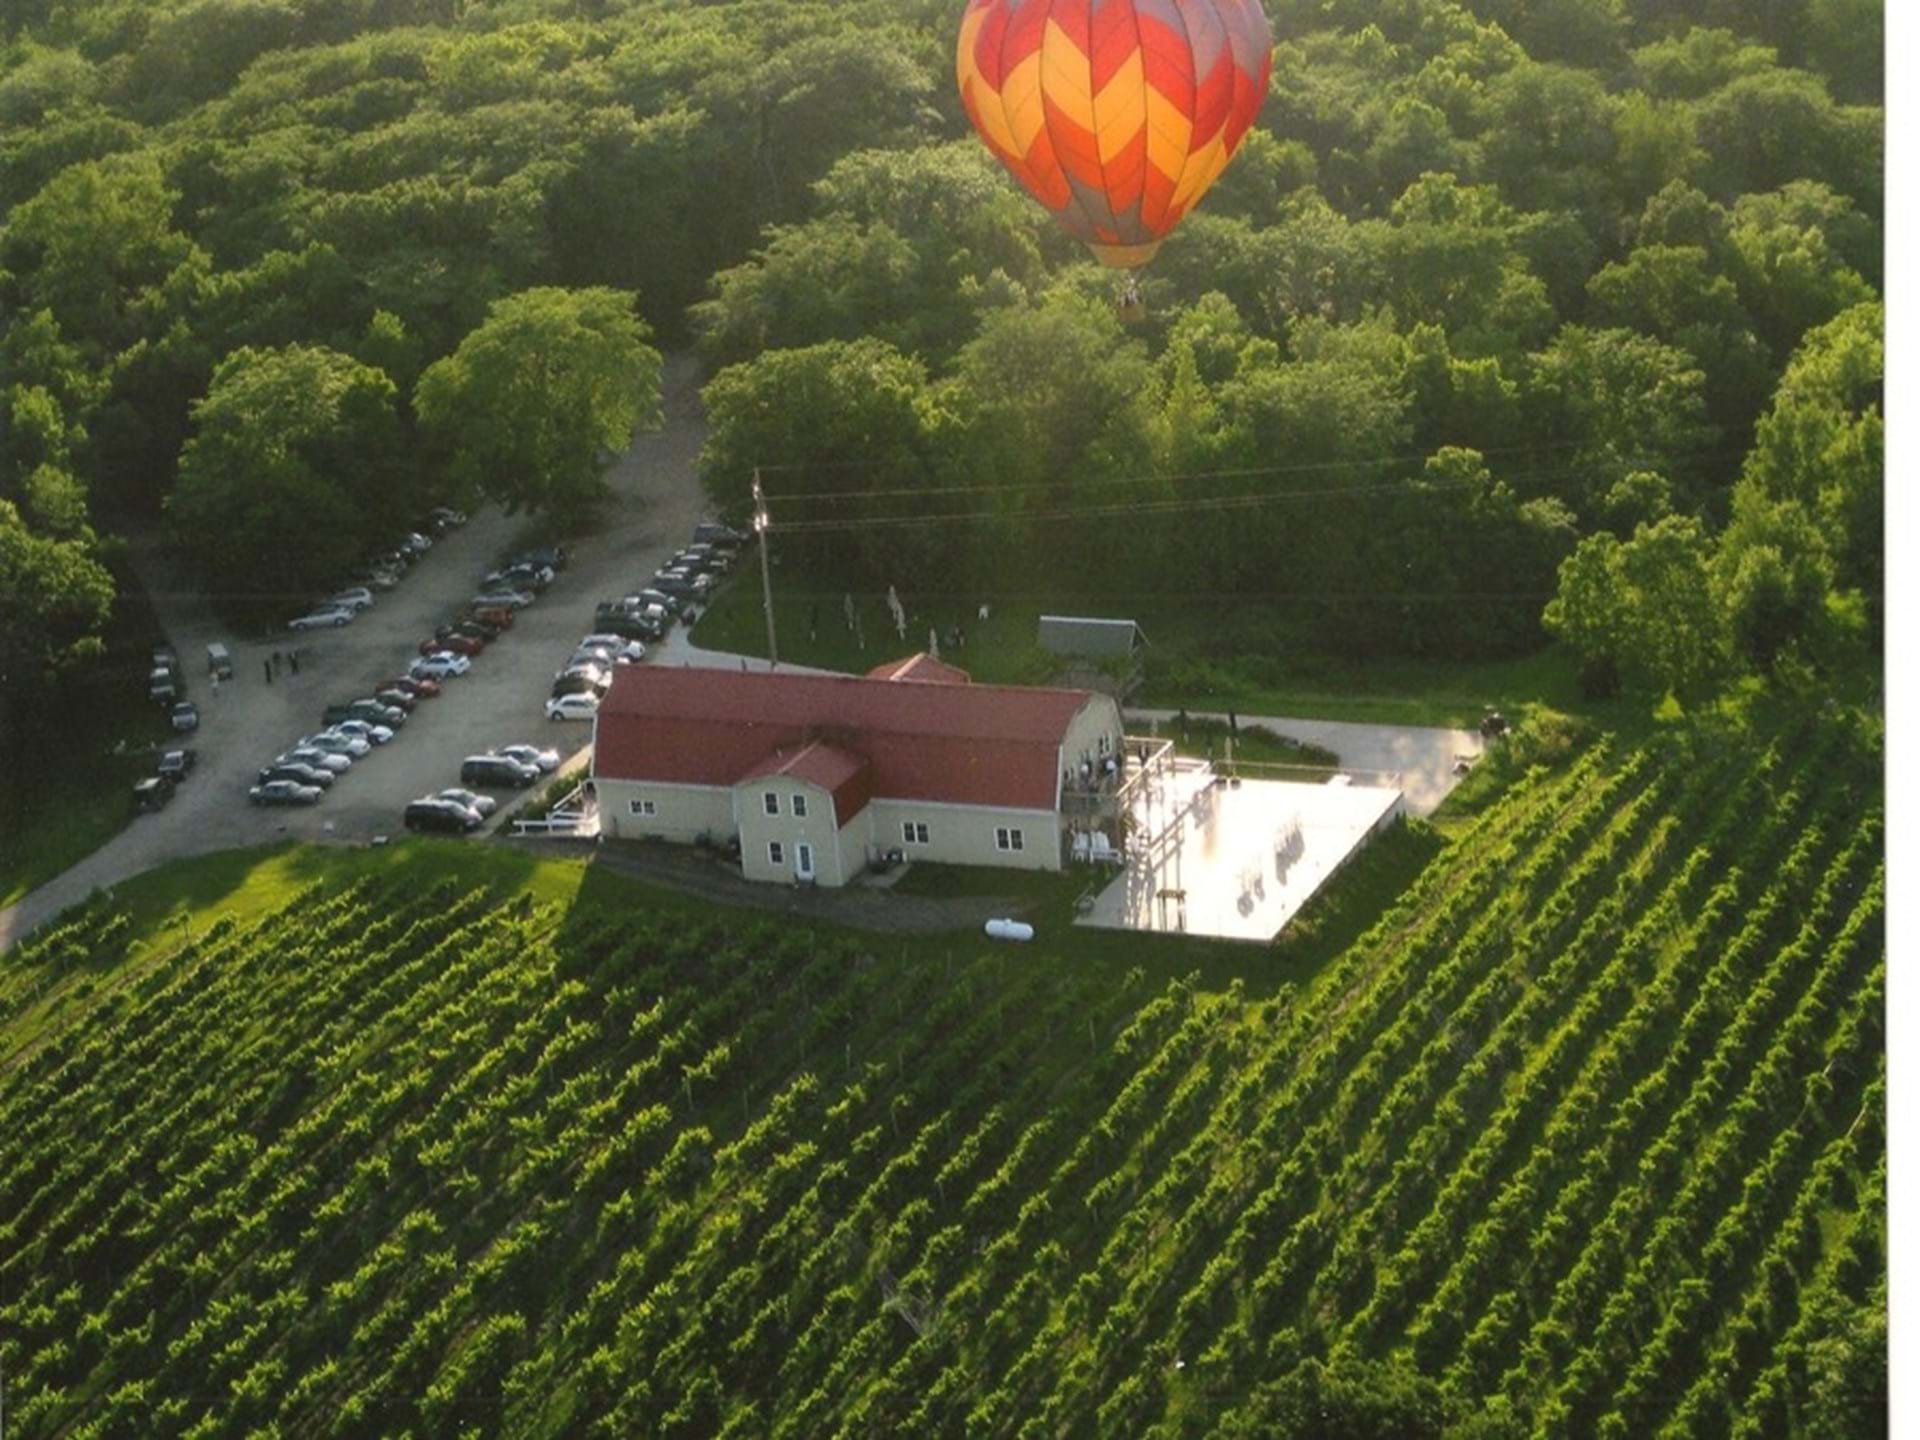 Summerset Winery and Vineyard view from the sky